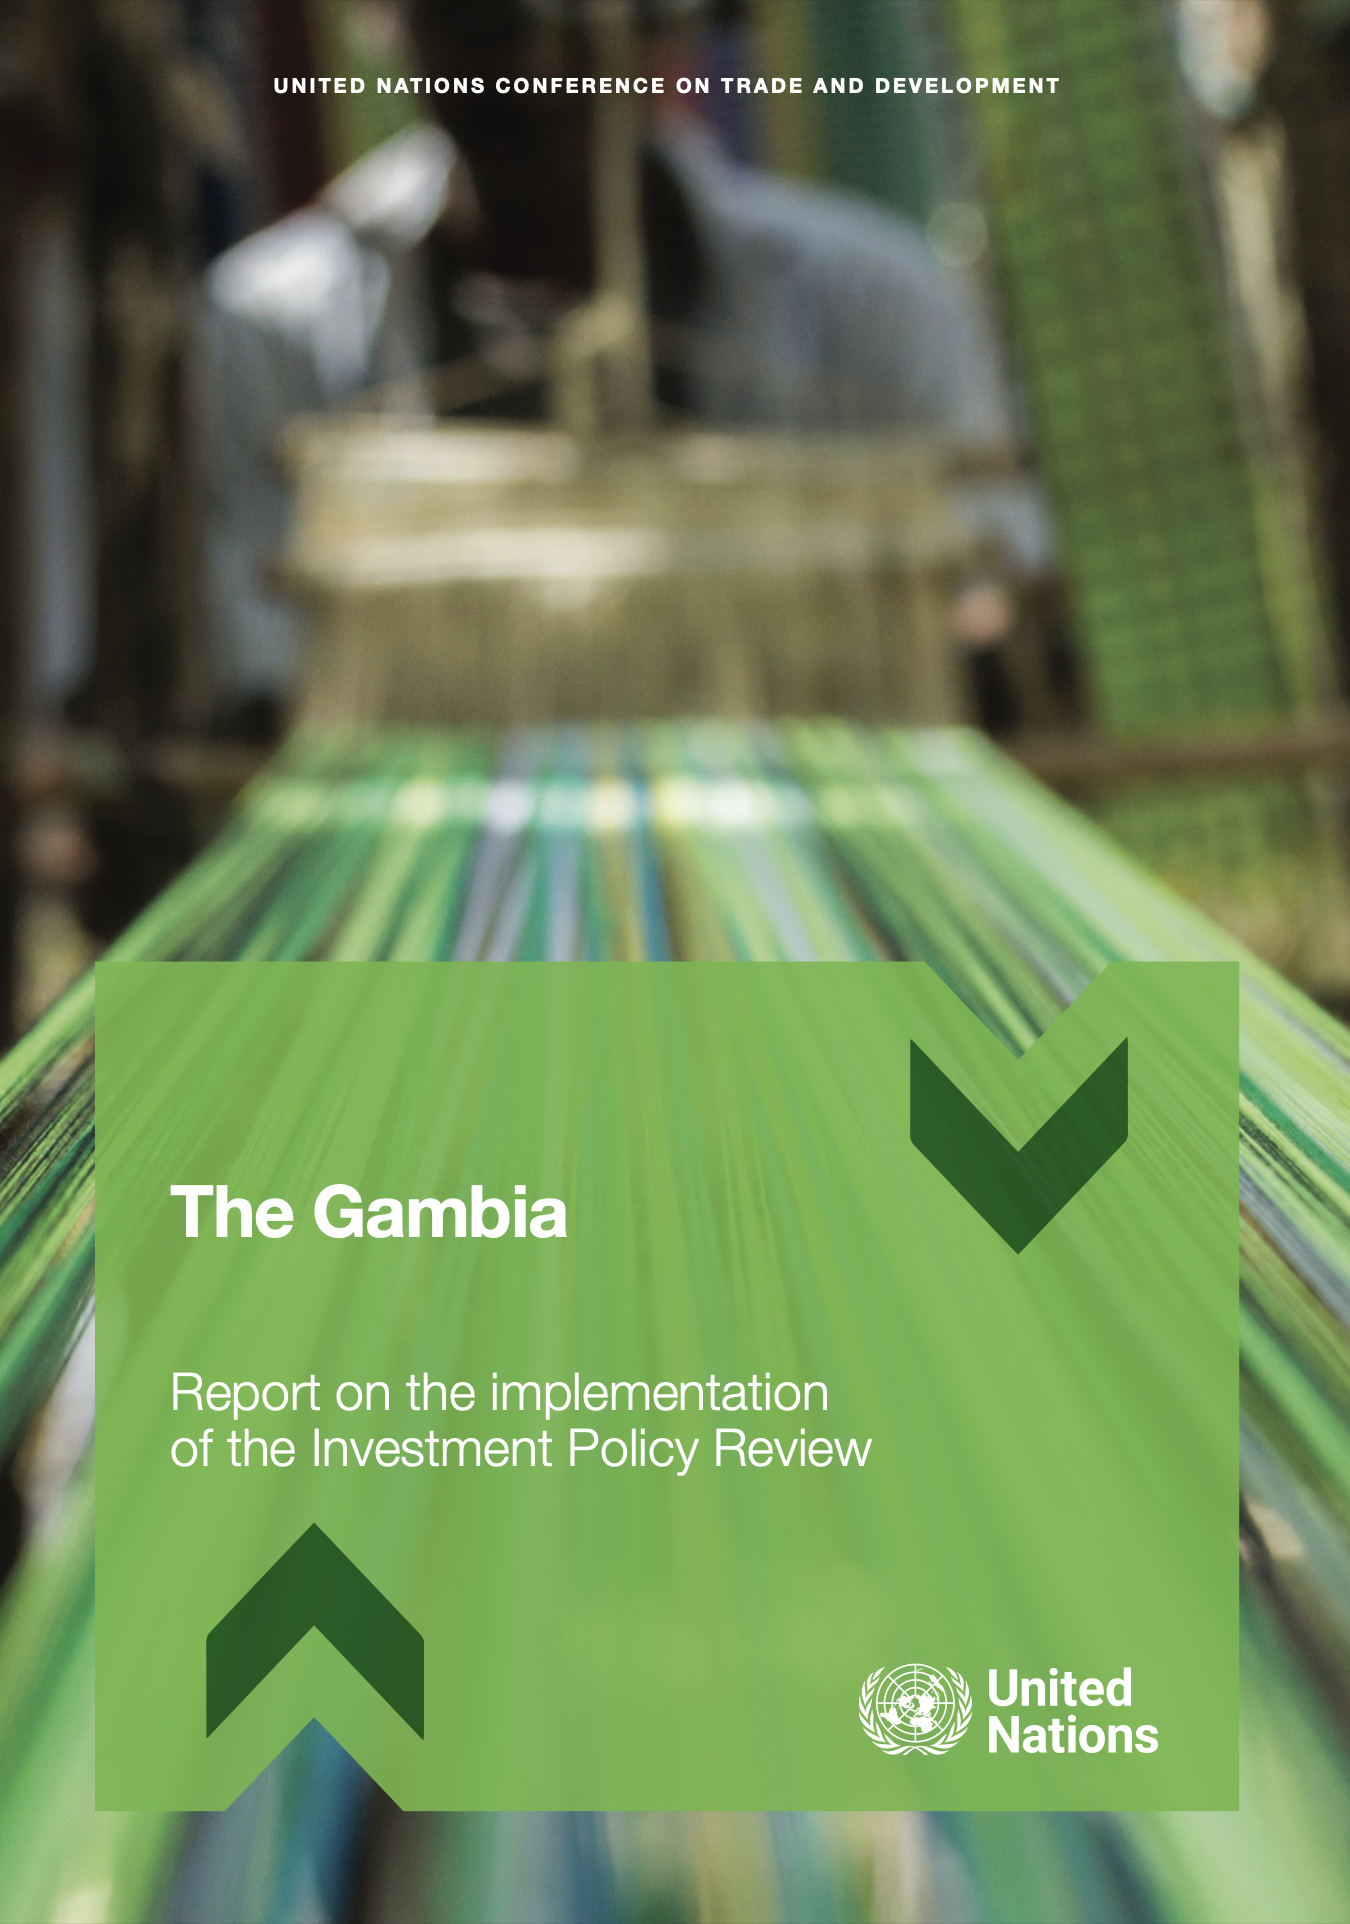 Report on the implementation of the Investment Policy Review of the Gambia